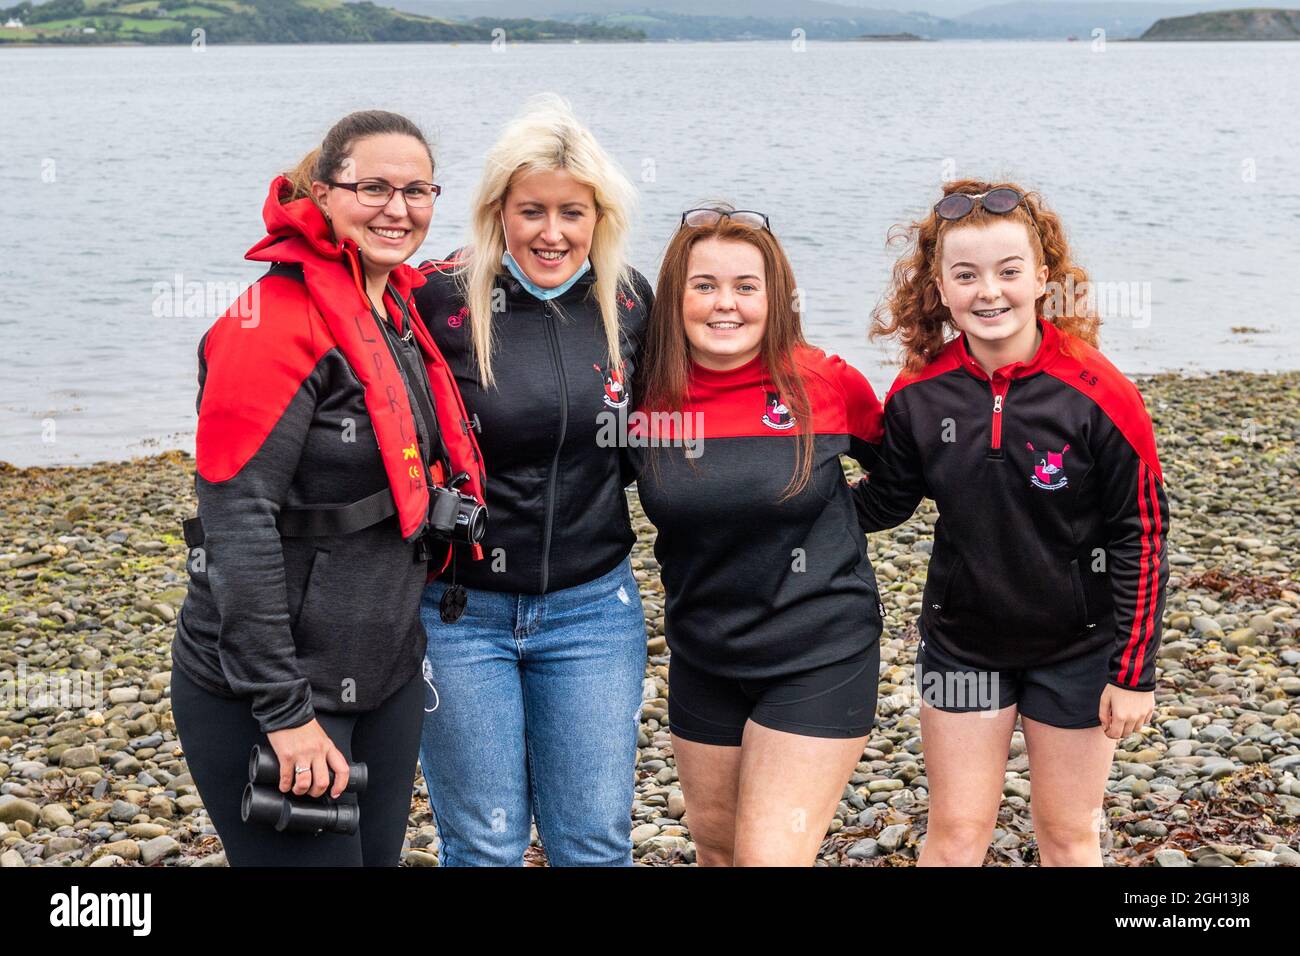 Bantry, West Cork, Ireland. 4th Sep, 2021. Rowing Ireland is holding the national offshore rowing championships in Bantry this weekend. The event, hosted by Bantry Rowing Club, is being contested by 30 rowing clubs from around Ireland. At the championships were Teresa Keeney, Katie Molloy and Amy and Eva Shovelin from Loughros Point Rowing Club, Donegal. Credit: AG News/Alamy Live News Stock Photo